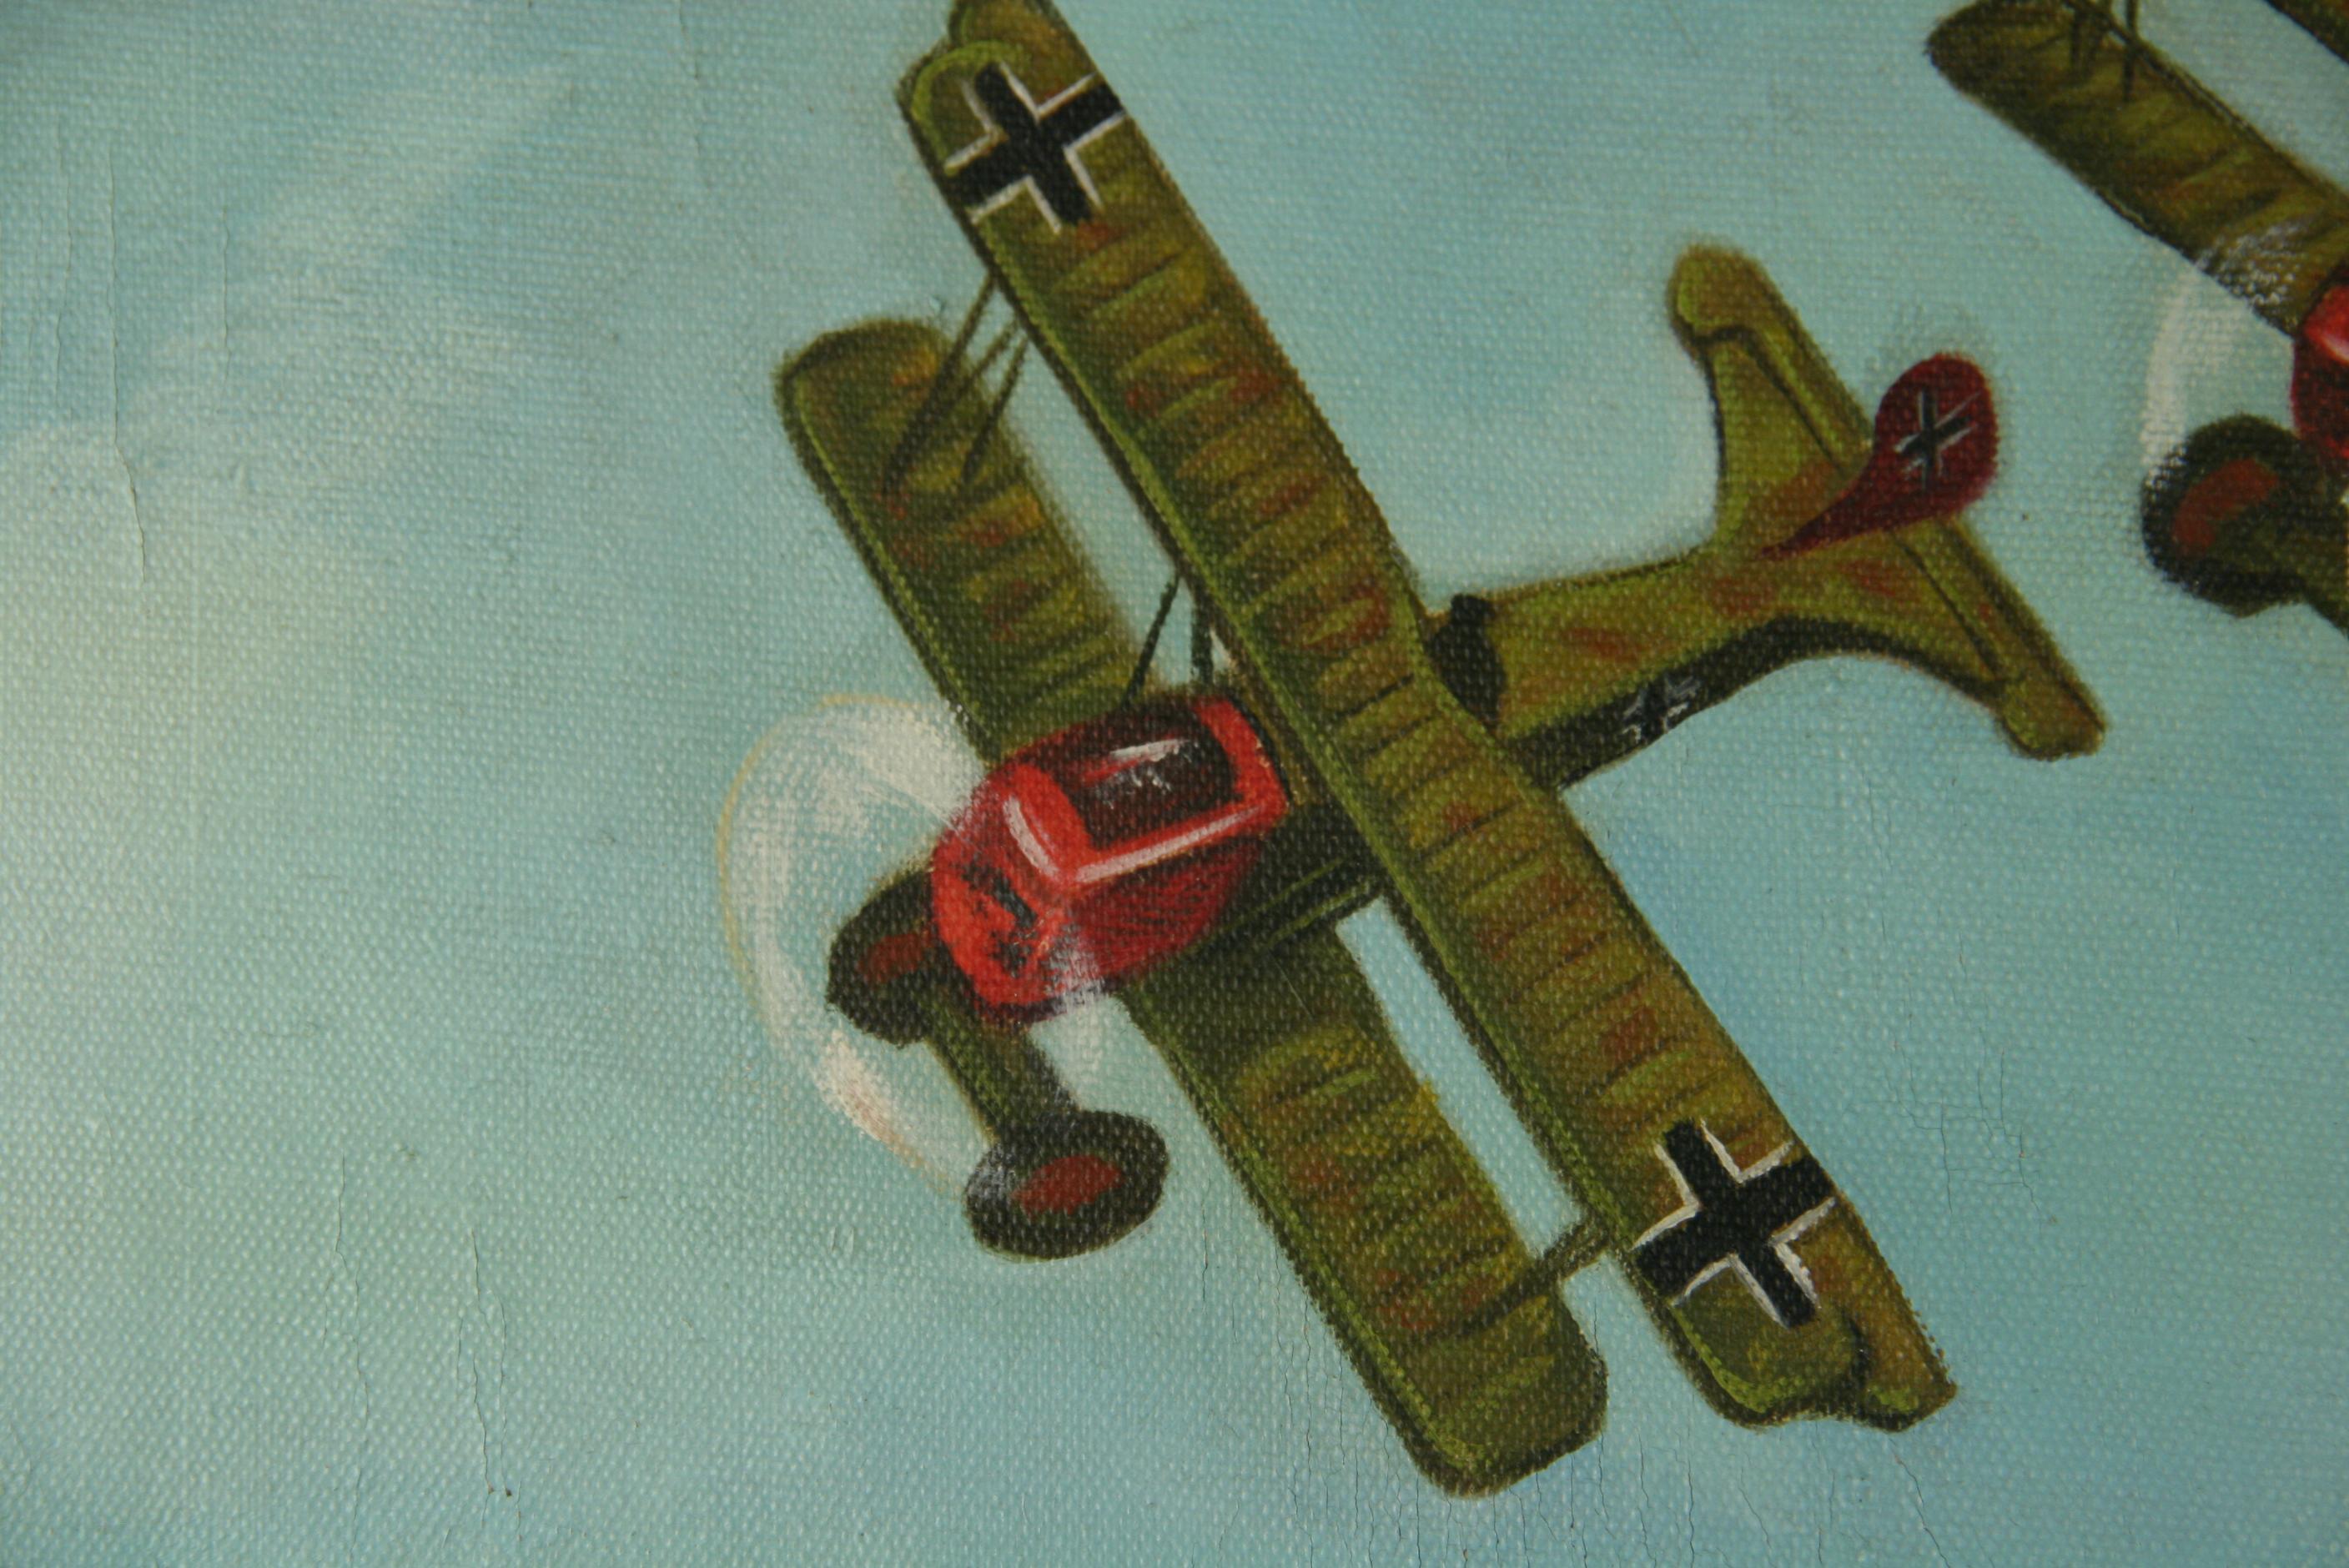 3700 oil on stretched canvas of biplanes in flight
Minor cracks in paint on left side